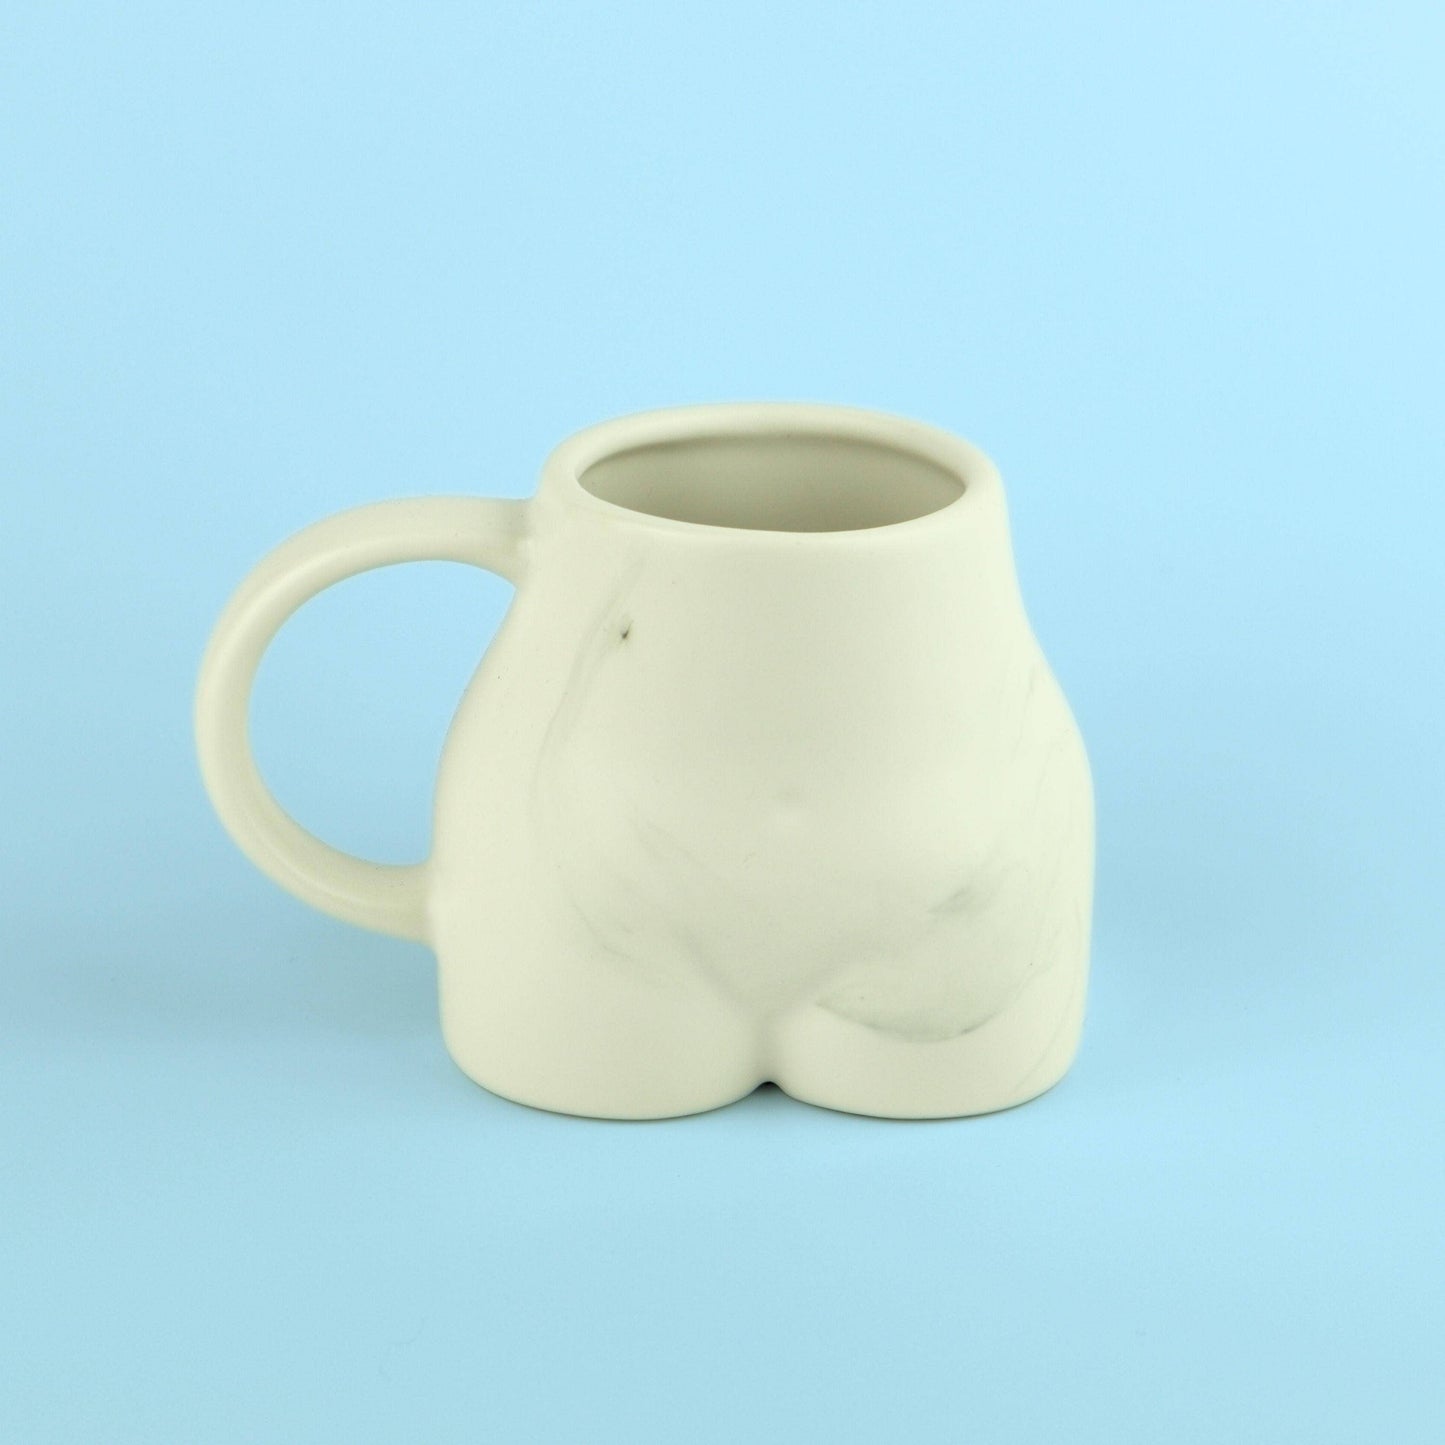 Body Butt Shaped - Mug (5 different color options): Pink